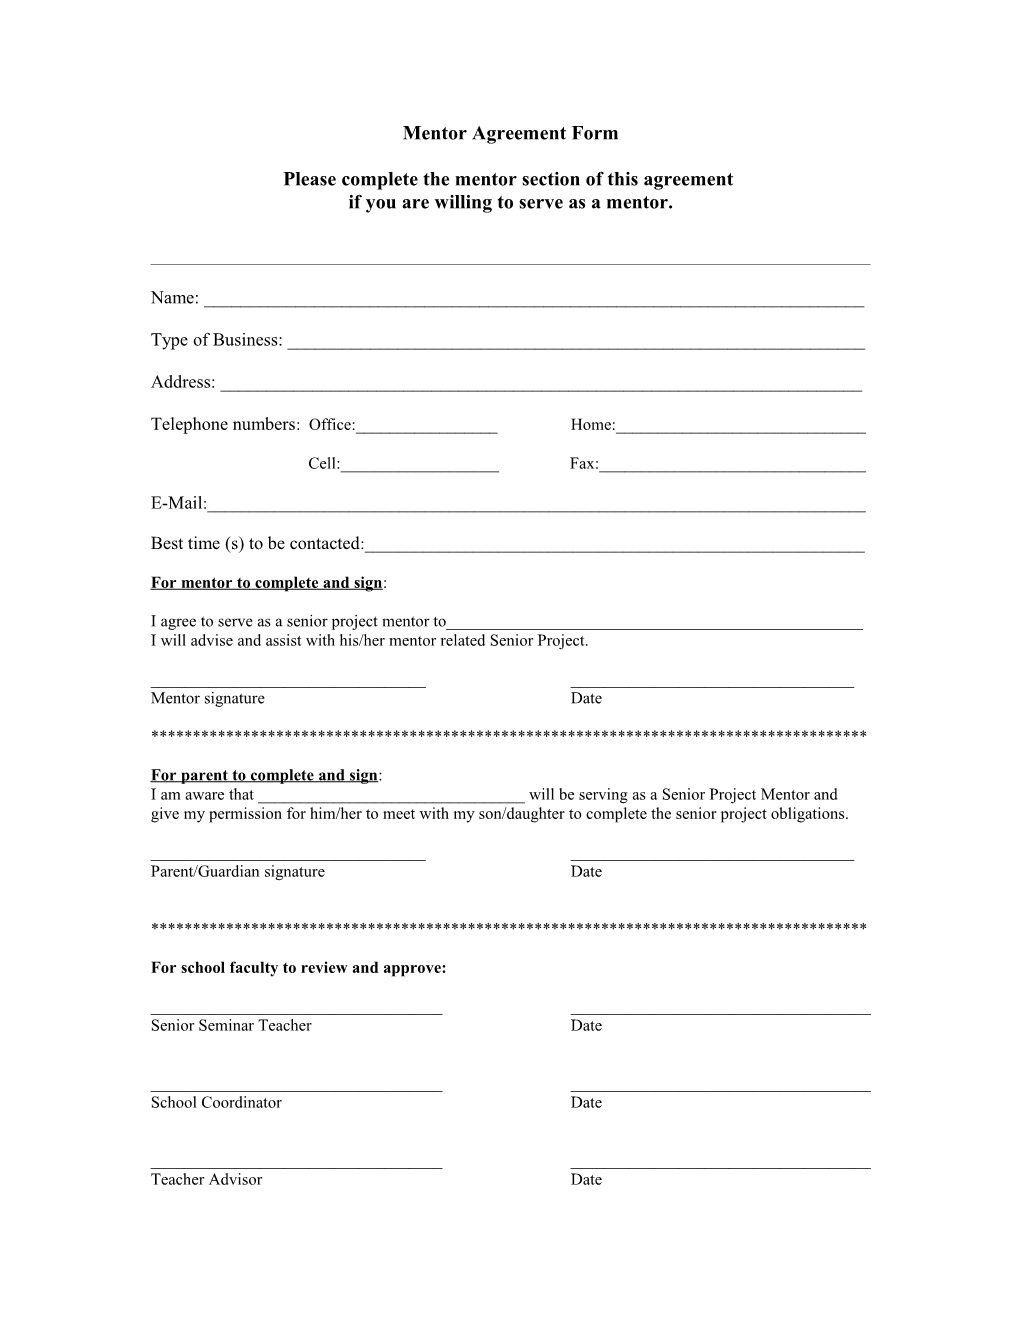 Mentor Guidelines and Confirmation Form